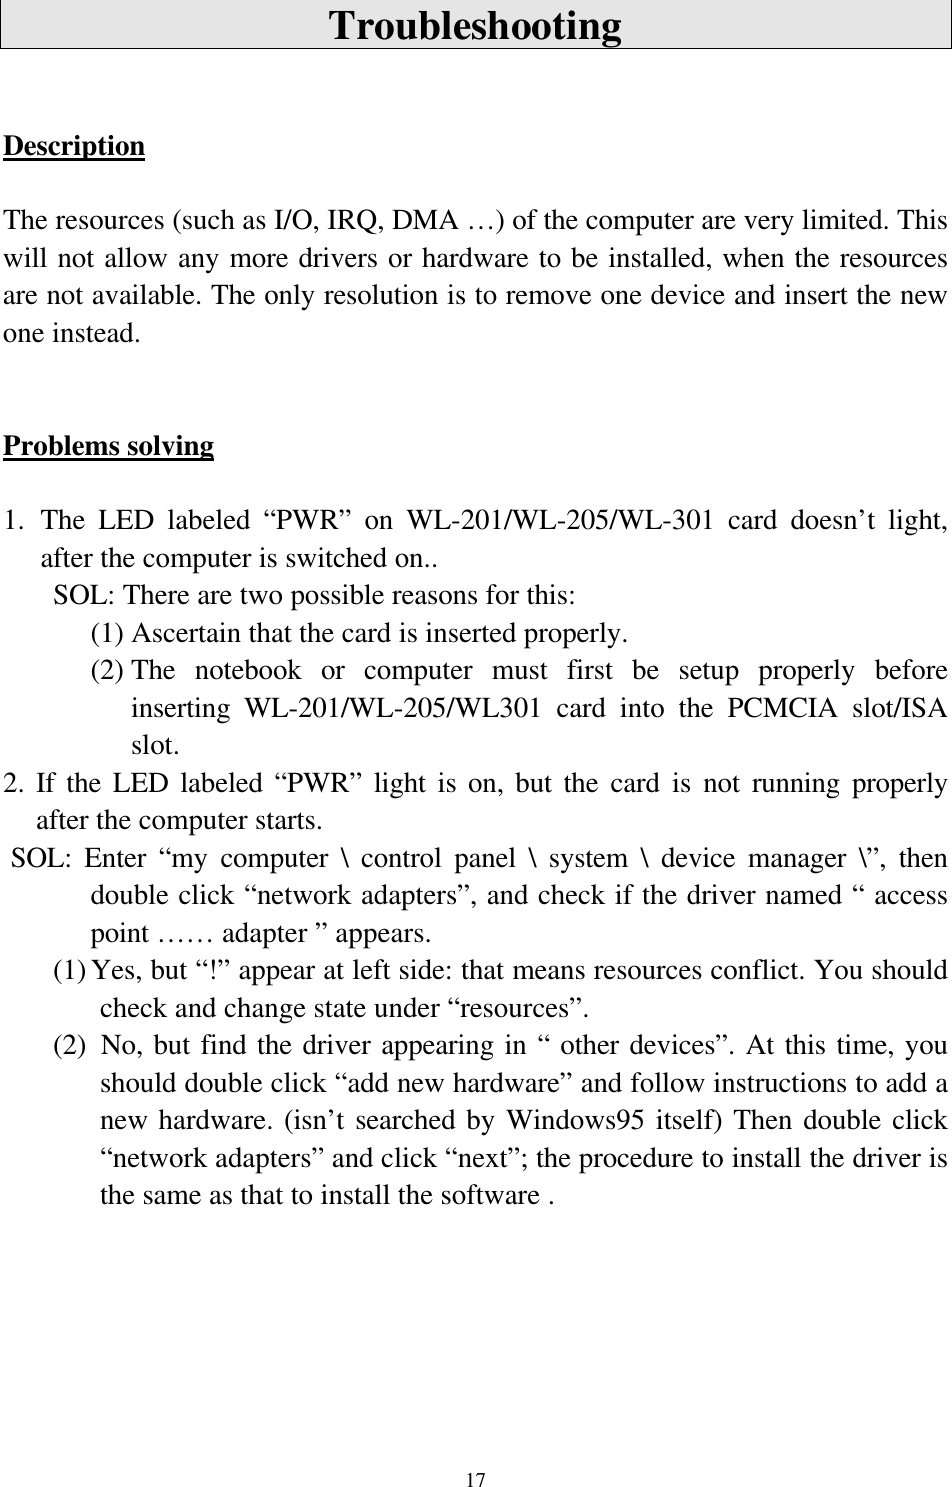 17TroubleshootingDescriptionThe resources (such as I/O, IRQ, DMA …) of the computer are very limited. Thiswill not allow any more drivers or hardware to be installed, when the resourcesare not available. The only resolution is to remove one device and insert the newone instead.Problems solving1. The LED labeled “PWR” on WL-201/WL-205/WL-301 card doesn’t light,after the computer is switched on..     SOL: There are two possible reasons for this:(1) Ascertain that the card is inserted properly.(2) The notebook or computer must first be setup properly beforeinserting WL-201/WL-205/WL301 card into the PCMCIA slot/ISAslot.2. If the LED labeled “PWR” light is on, but the card is not running properlyafter the computer starts. SOL: Enter “my computer \ control panel \ system \ device manager \”, thendouble click “network adapters”, and check if the driver named “ accesspoint …… adapter ” appears.(1) Yes, but “!” appear at left side: that means resources conflict. You shouldcheck and change state under “resources”.(2)  No, but find the driver appearing in “ other devices”. At this time, youshould double click “add new hardware” and follow instructions to add anew hardware. (isn’t searched by Windows95 itself) Then double click“network adapters” and click “next”; the procedure to install the driver isthe same as that to install the software .